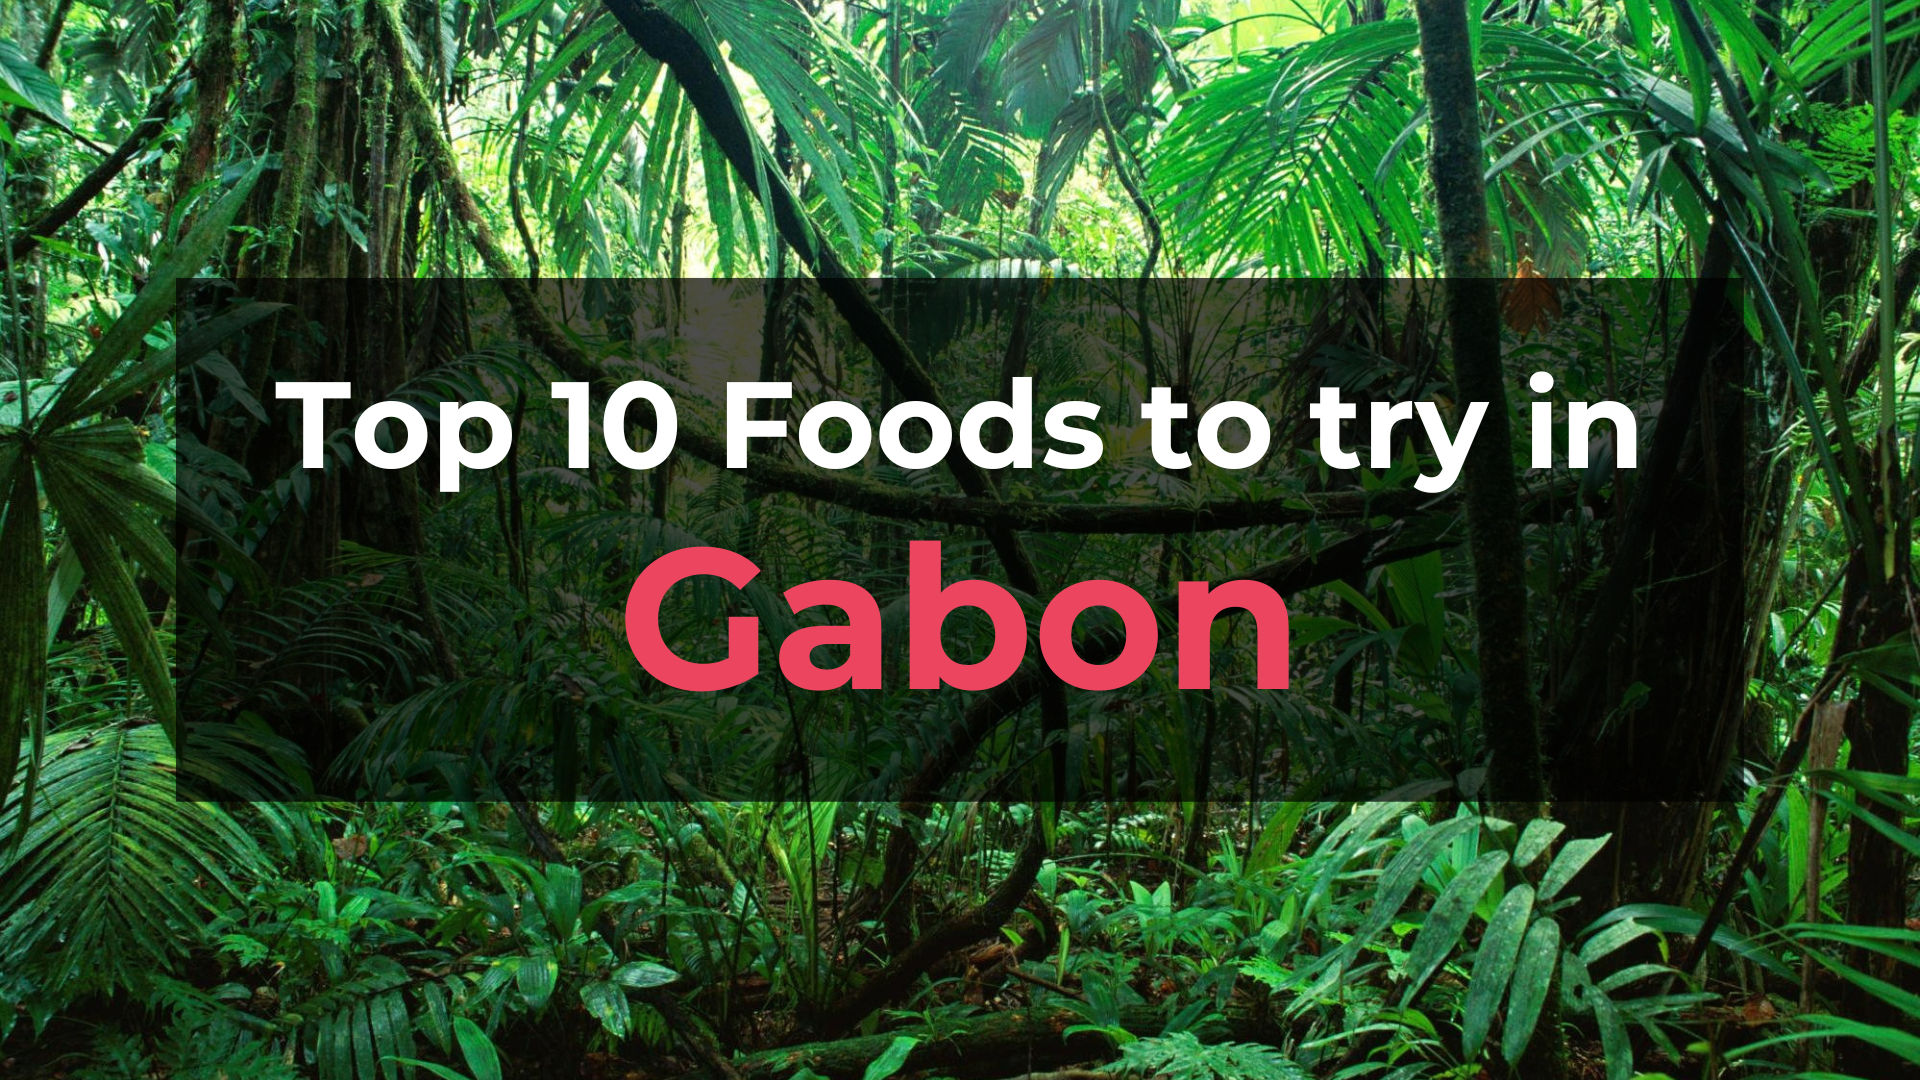 Read more about the article Top 10 Foods in Gabon